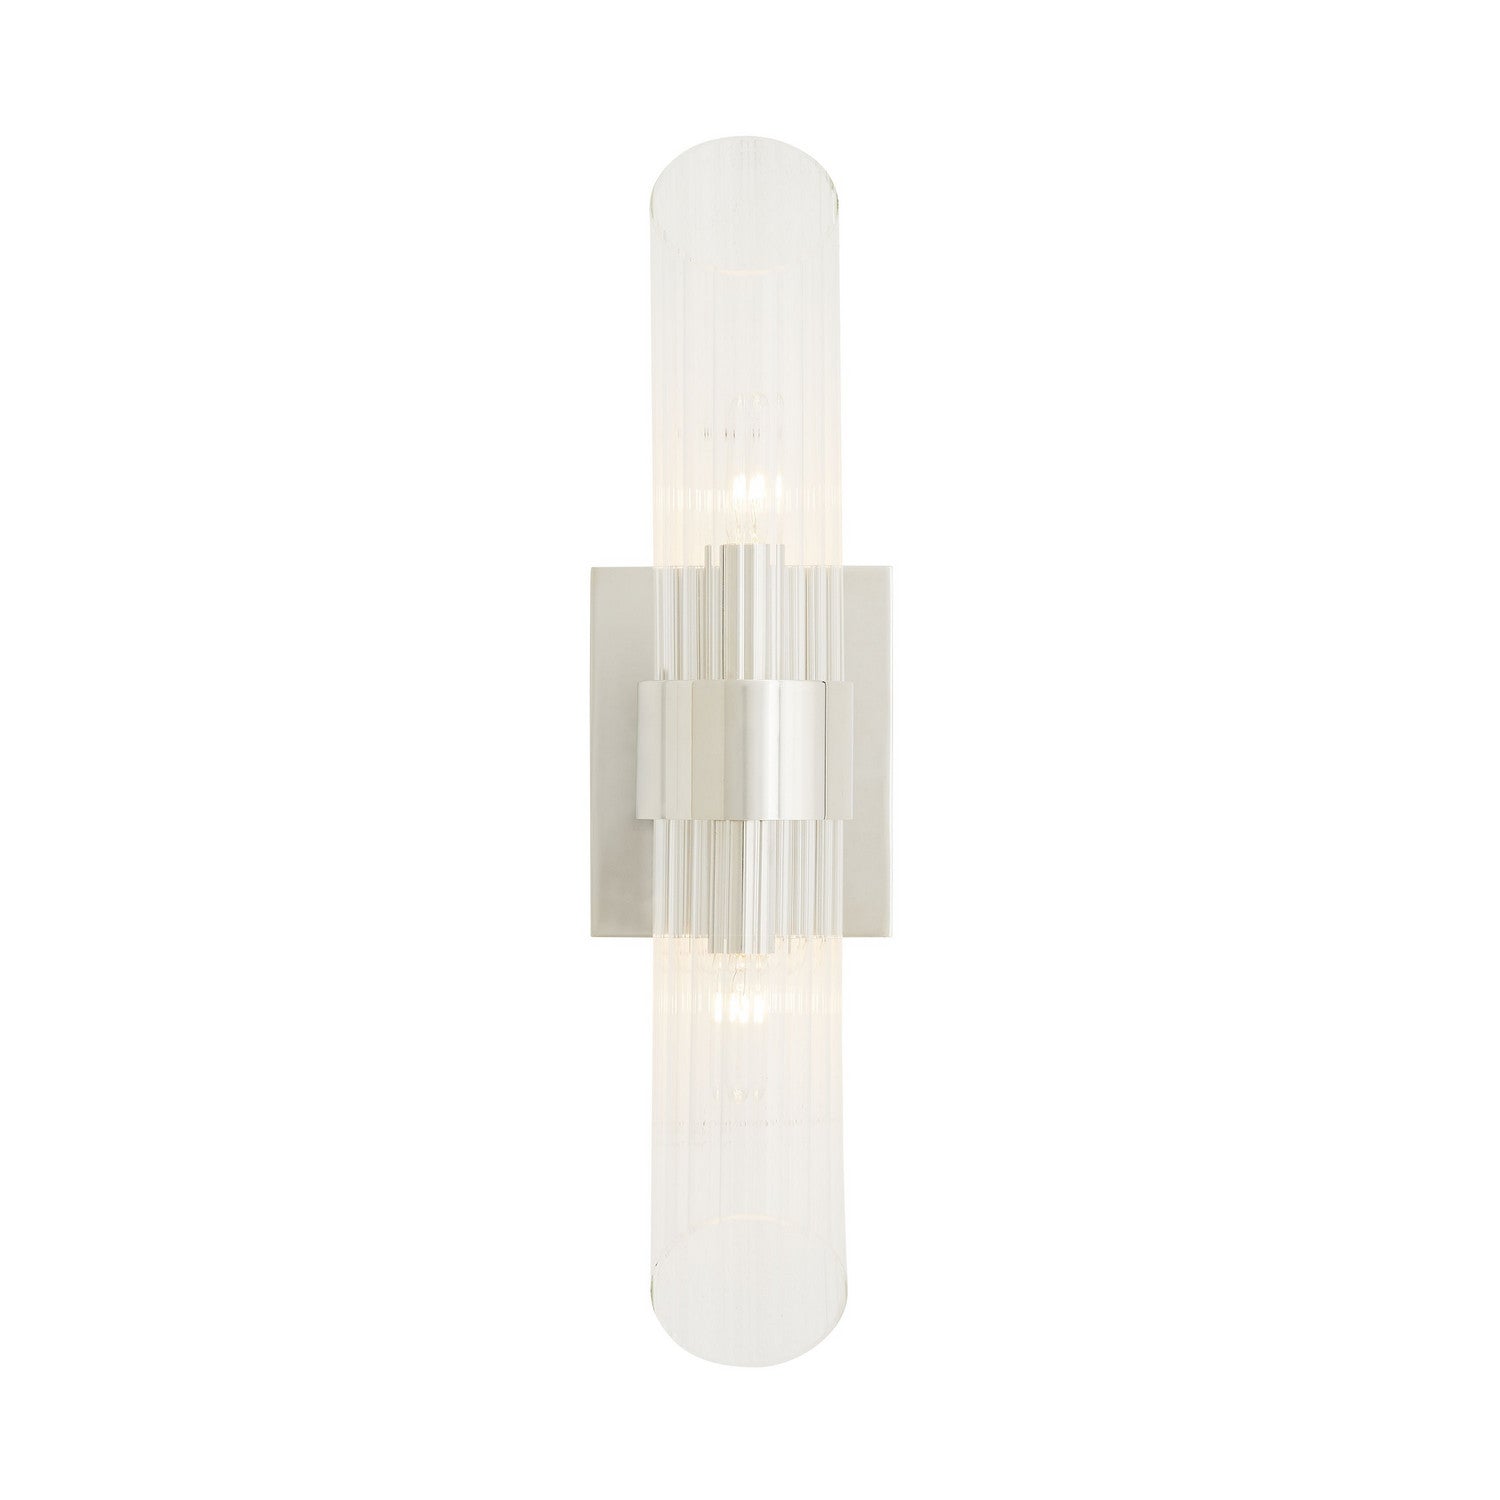 Two Light Wall Sconce from the Elyse collection in Polished Nickel finish